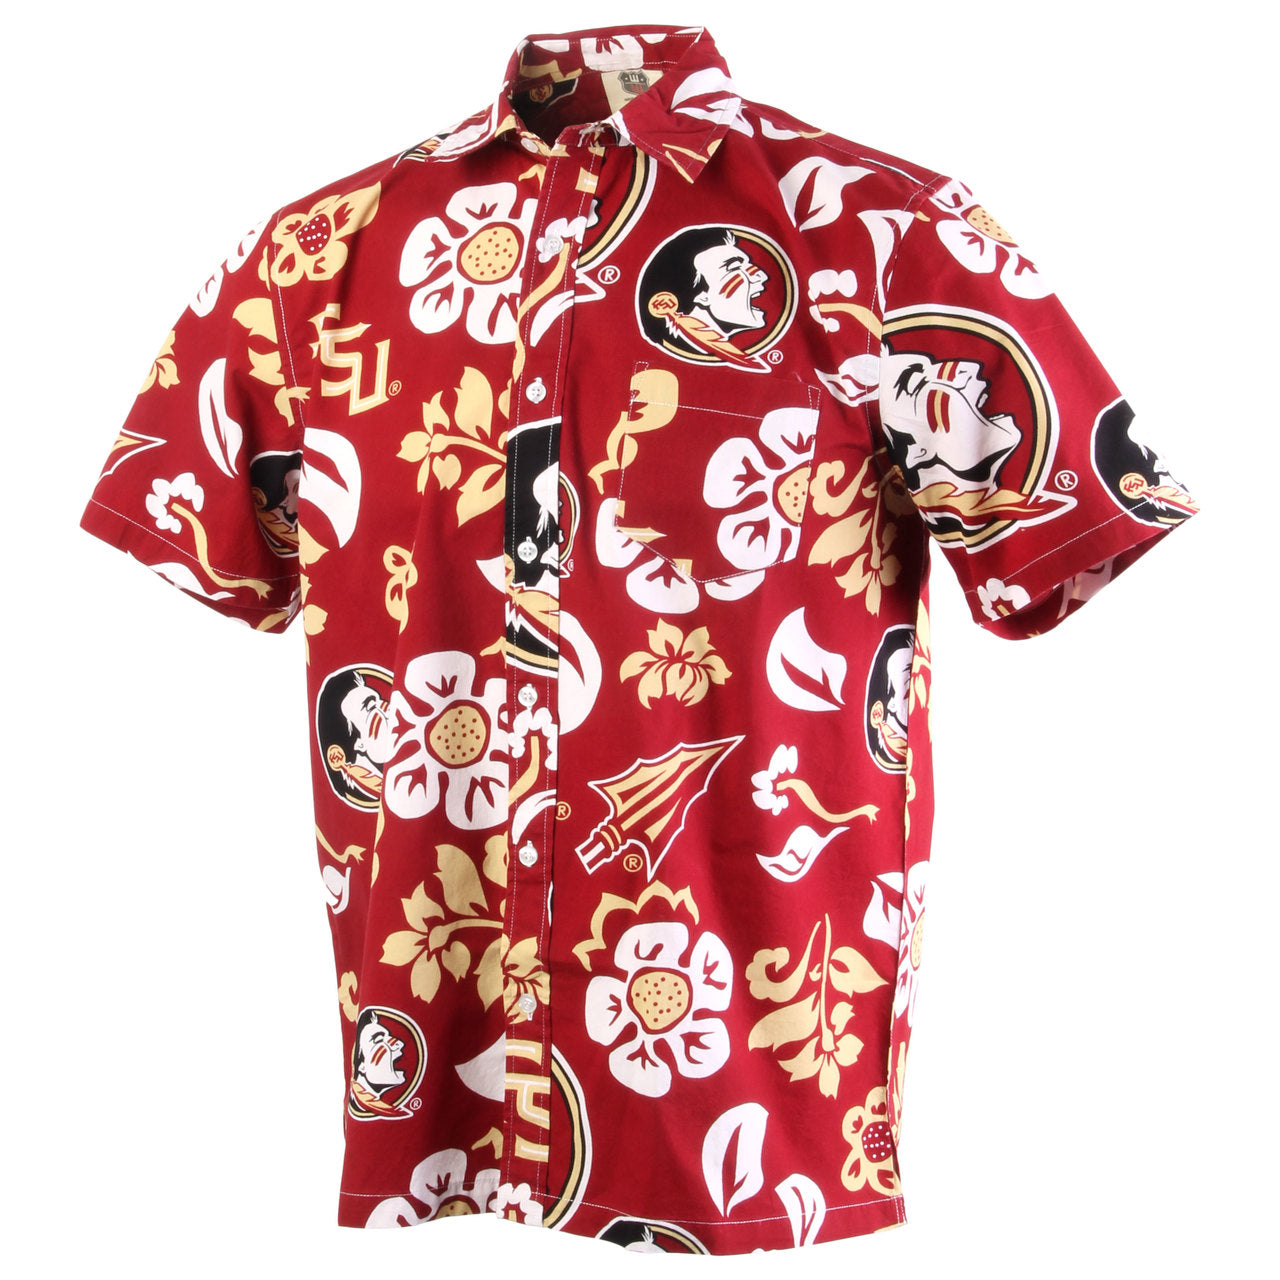 Wes & Willy Florida State Seminoles Men's Floral Top